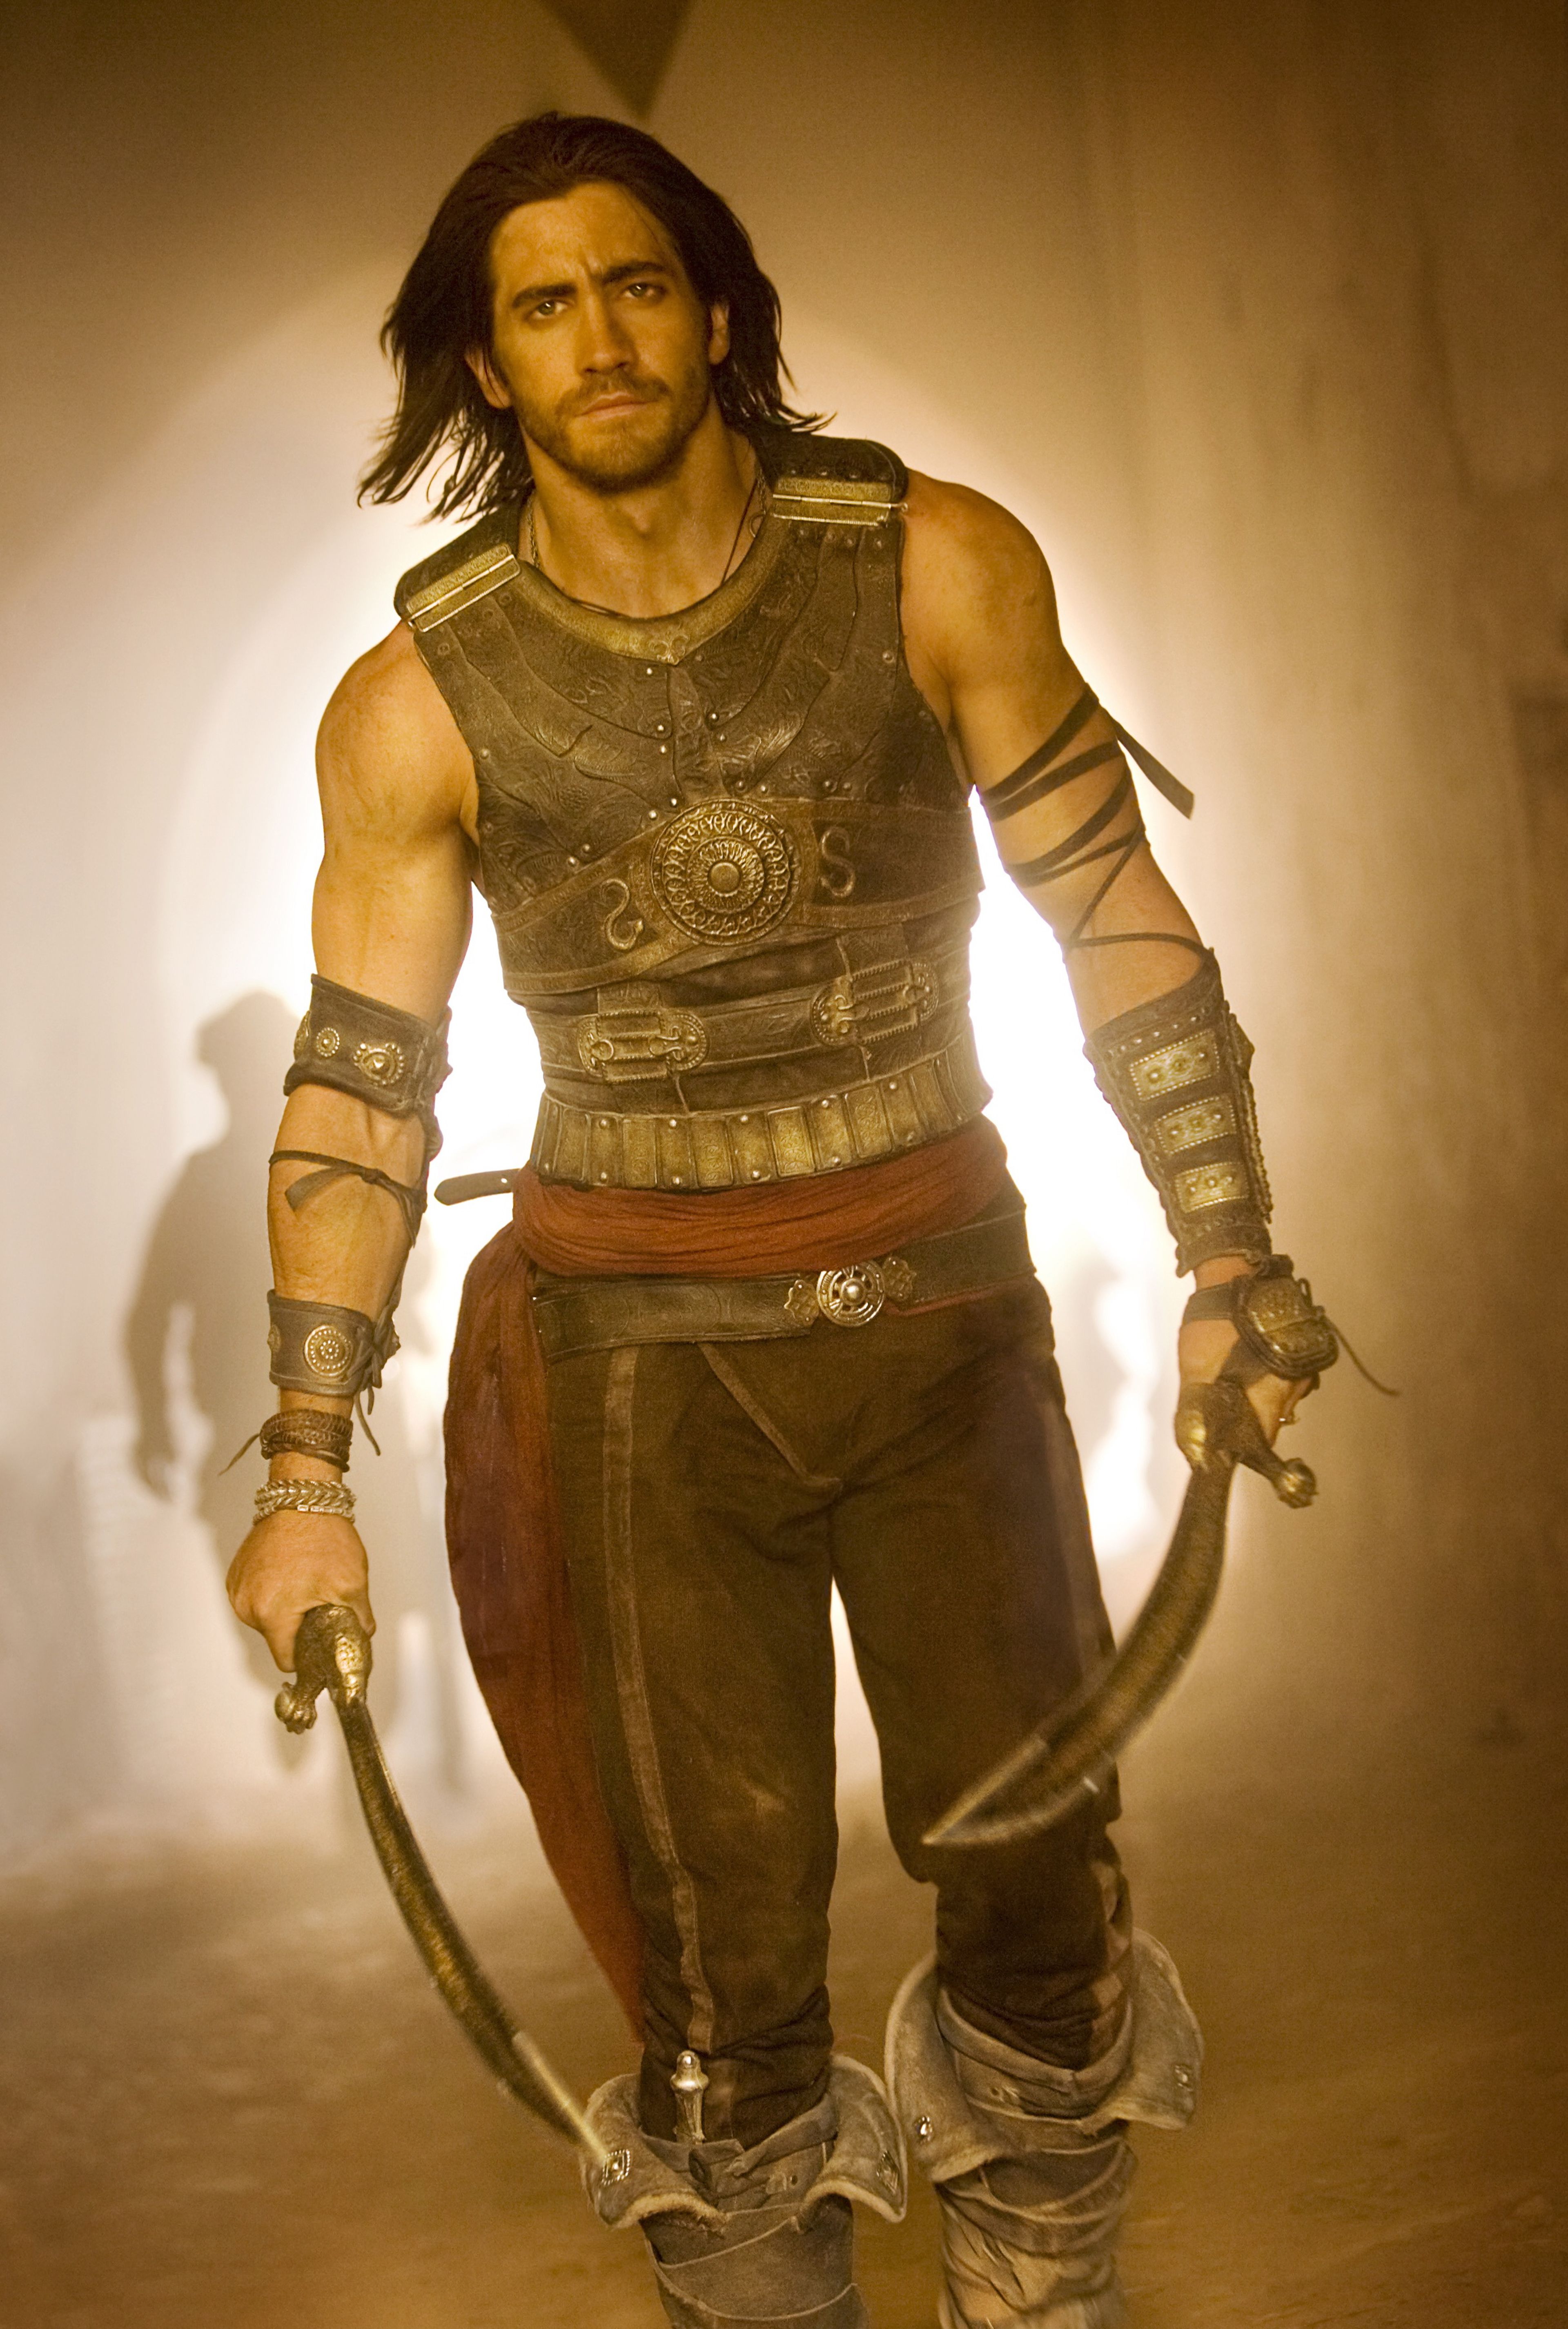 Top chicos: Prince of Persia